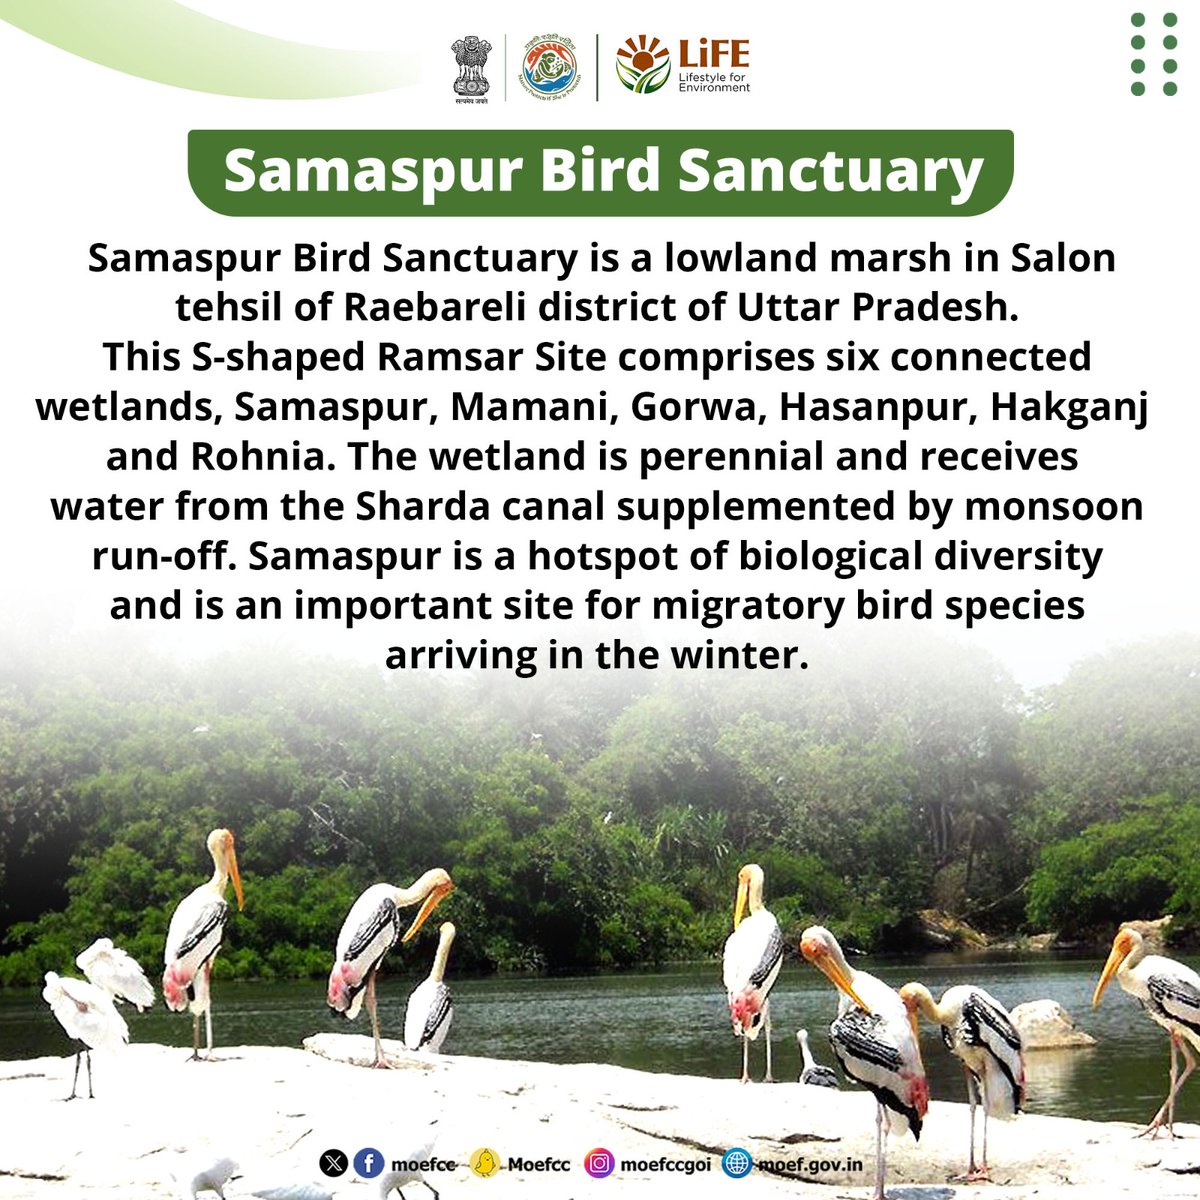 Discovering India's Ramsar Sites

Day 67: Samaspur Bird Sanctuary

From wetlands to wildlife, each site is a unique haven for nature. Let's celebrate and safeguard these vital ecosystems together!

#RamsarSites #MissionLiFE #ProPlanetPeople